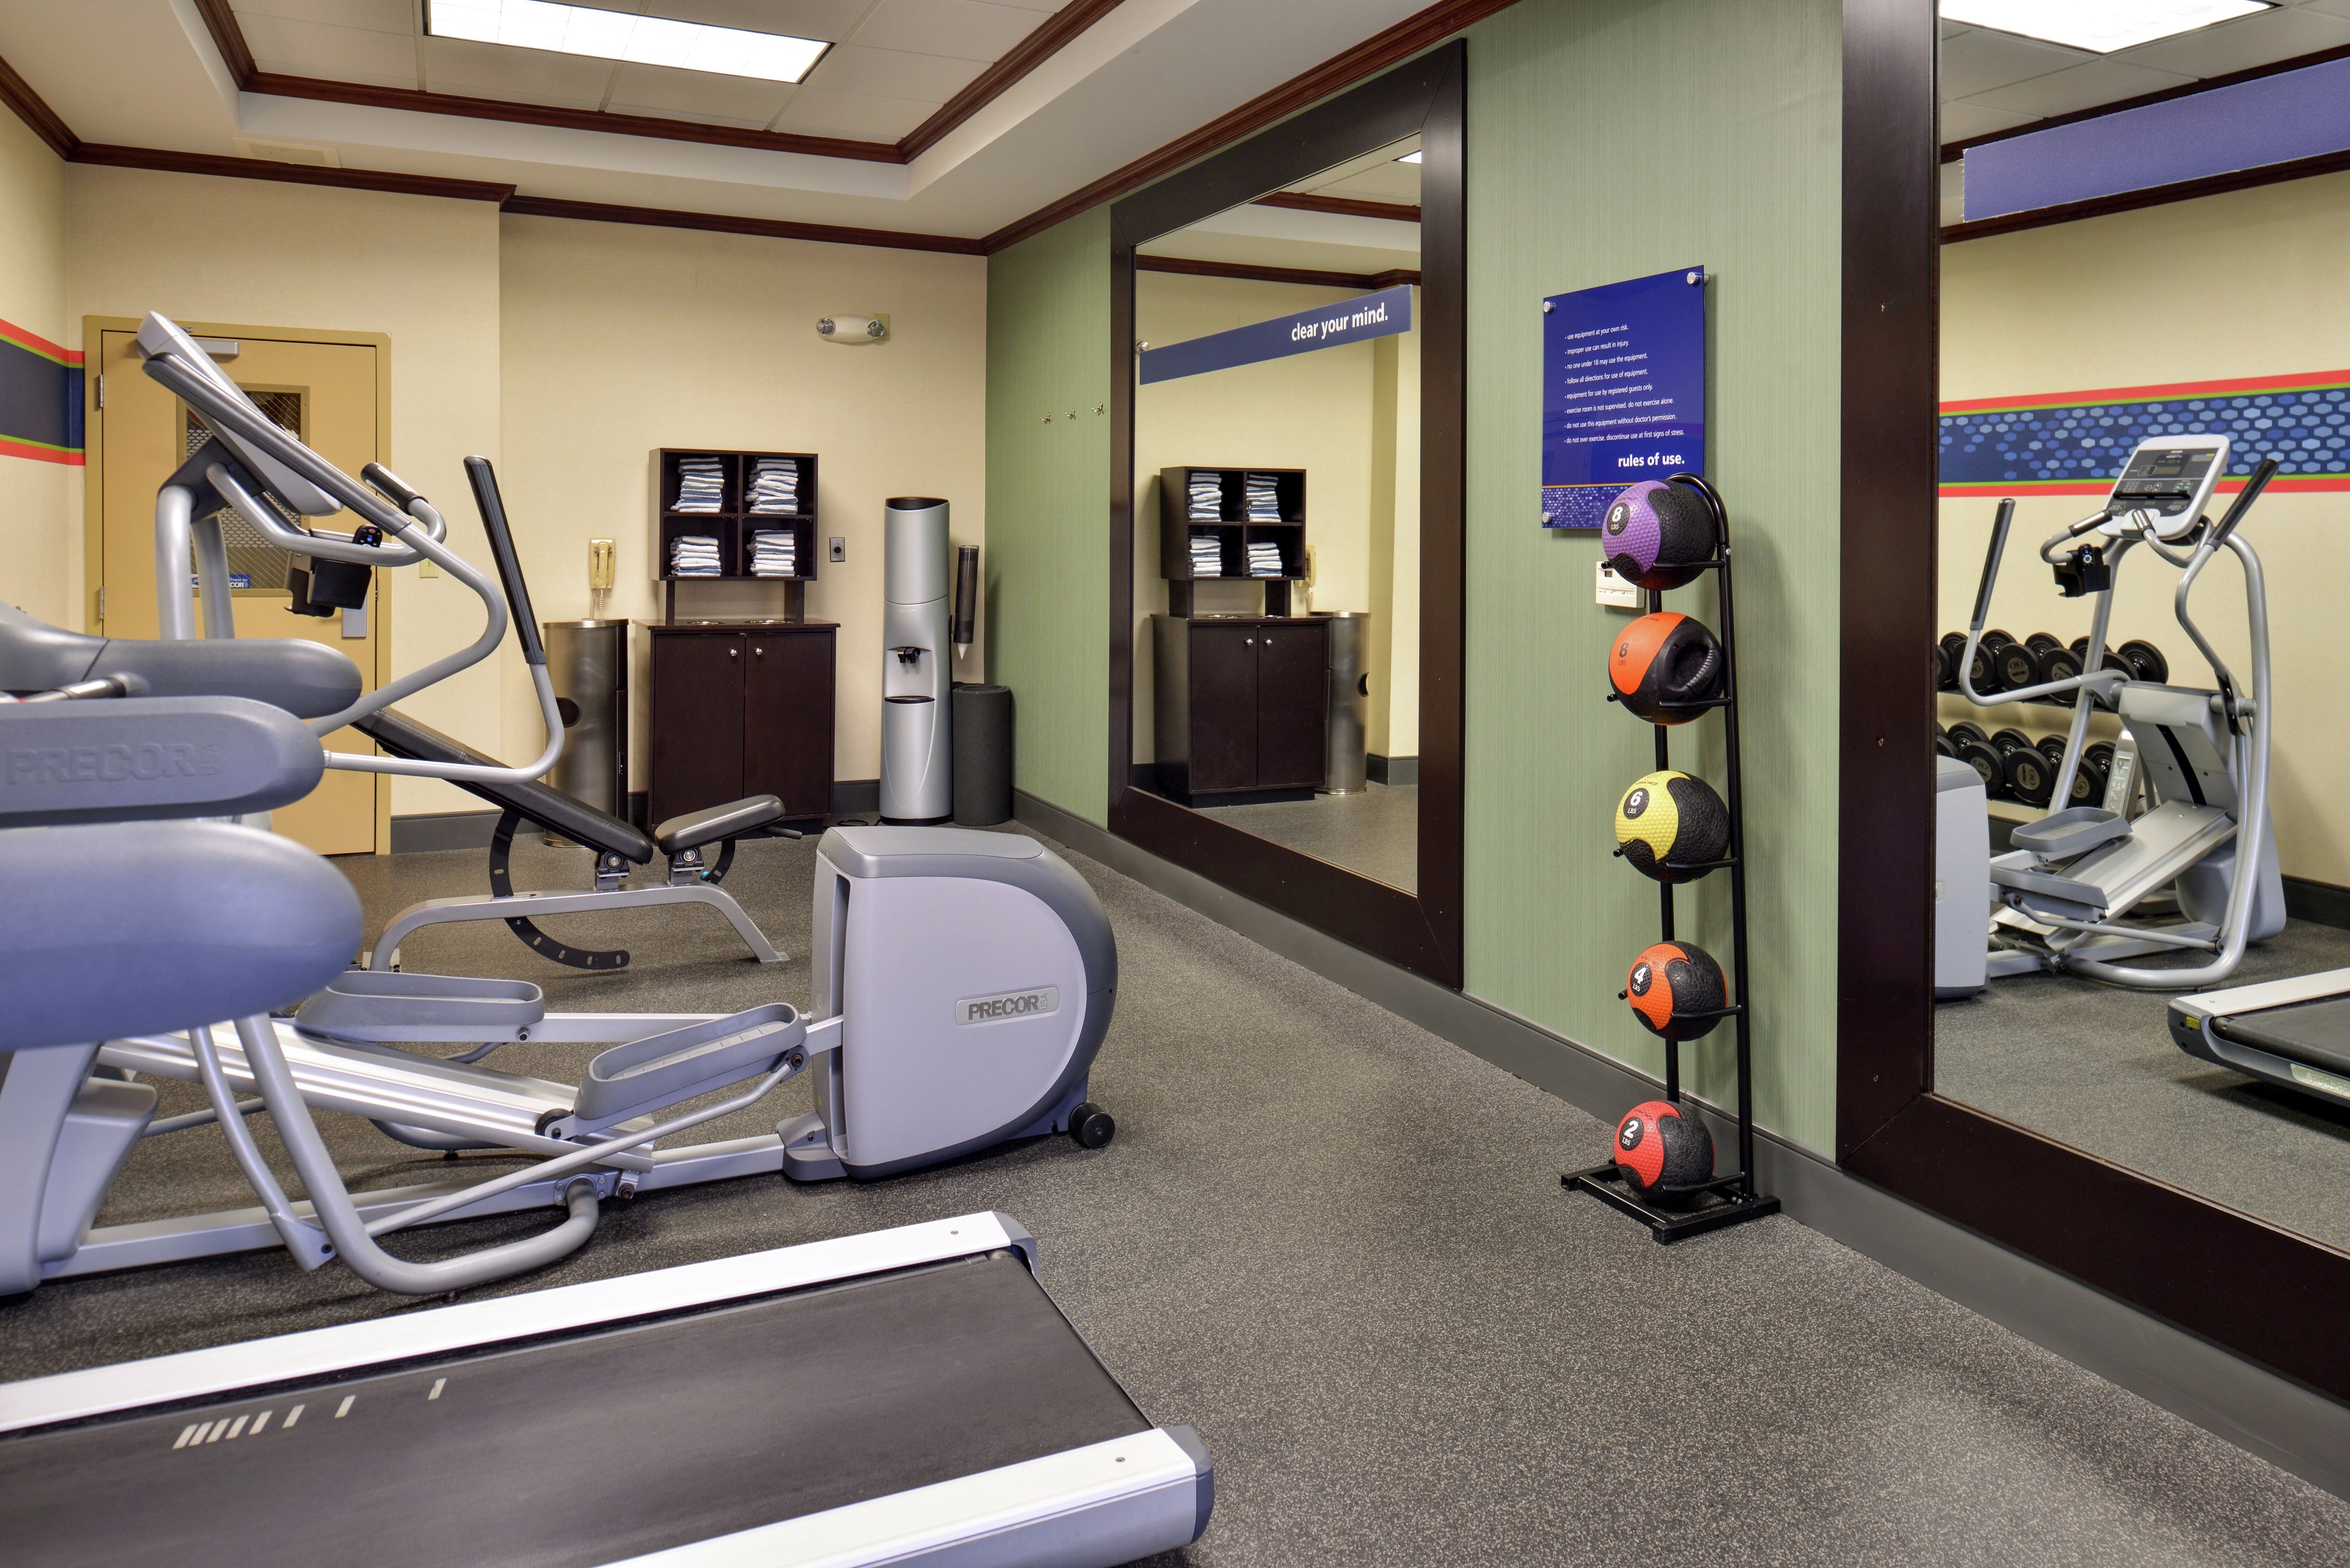 Fitness Center With Cardio Equipment, Towel Station, Water Cooler, and Weight Balls Between Two Large Mirrors